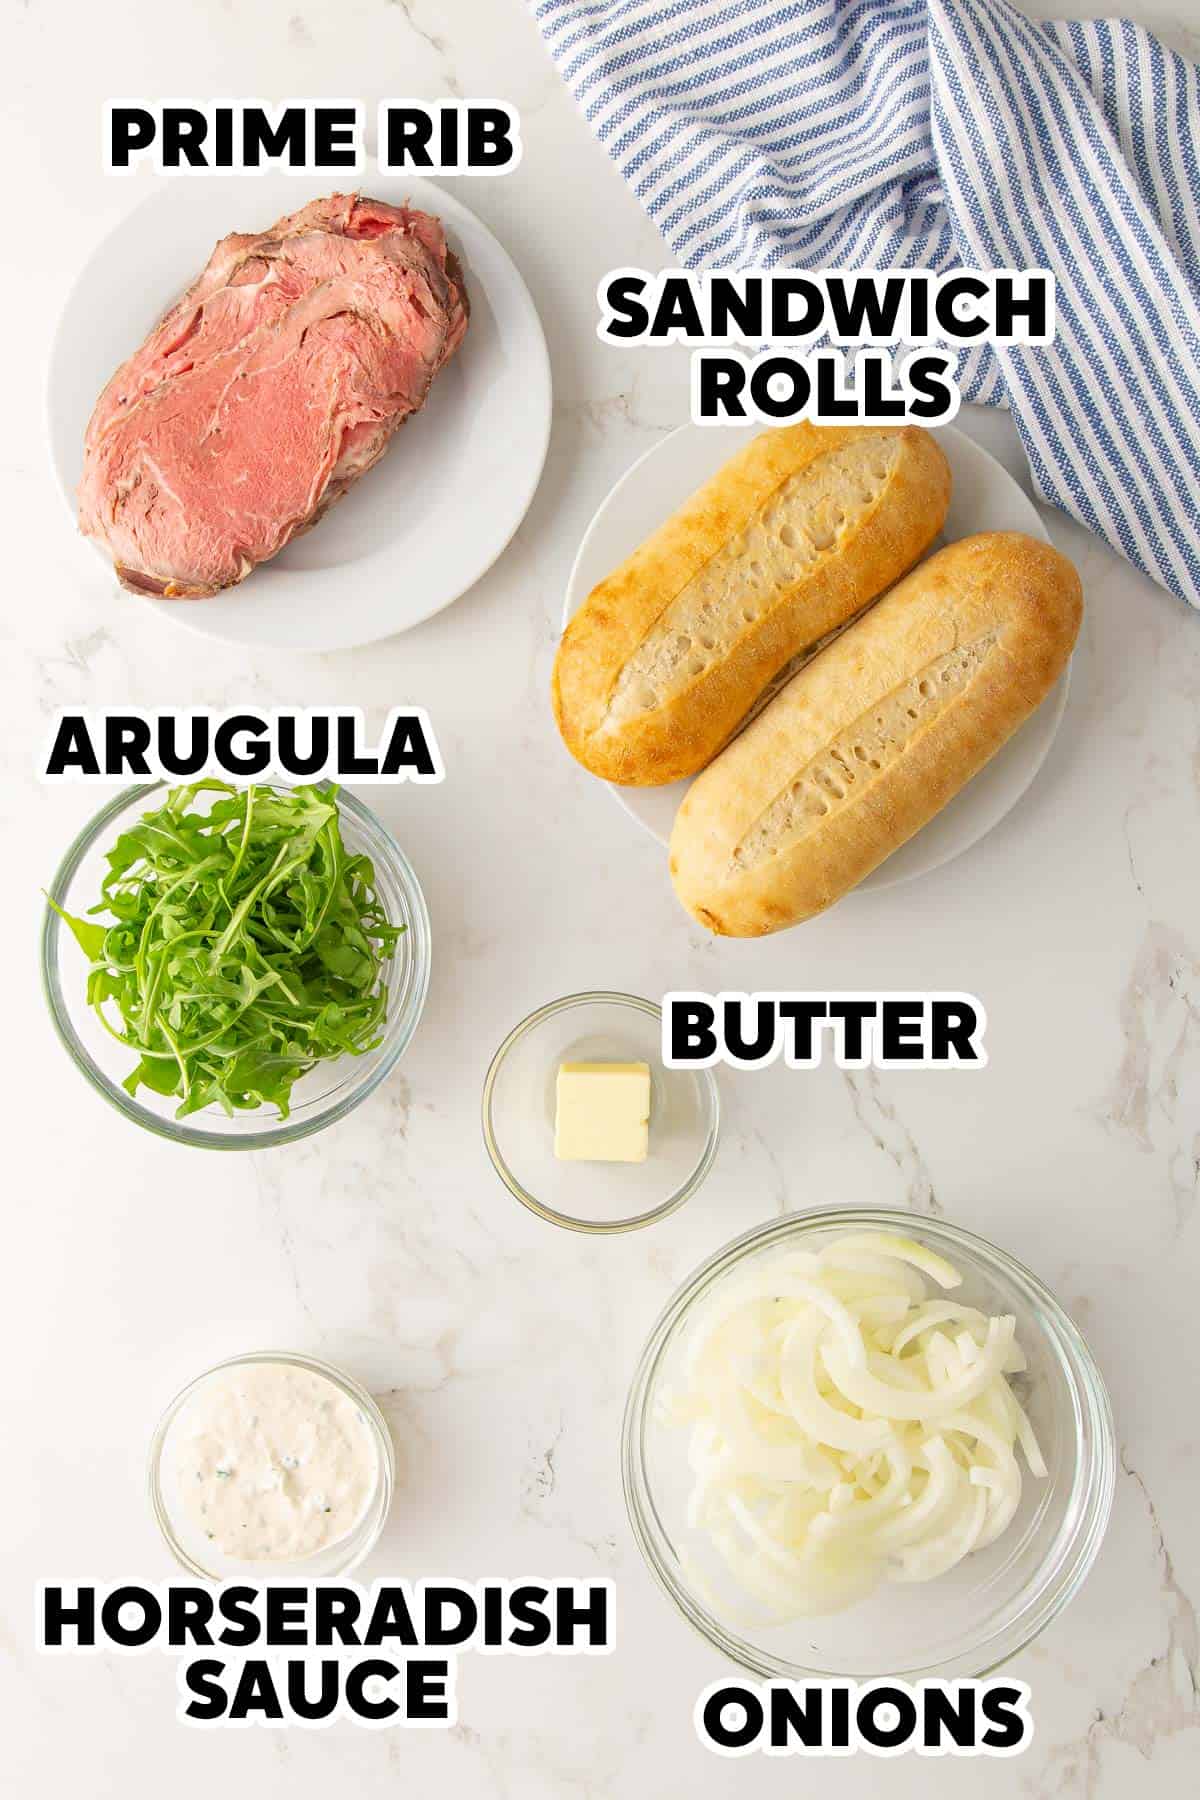 Ingredients for making prime rib sandwiches on white marble surface.